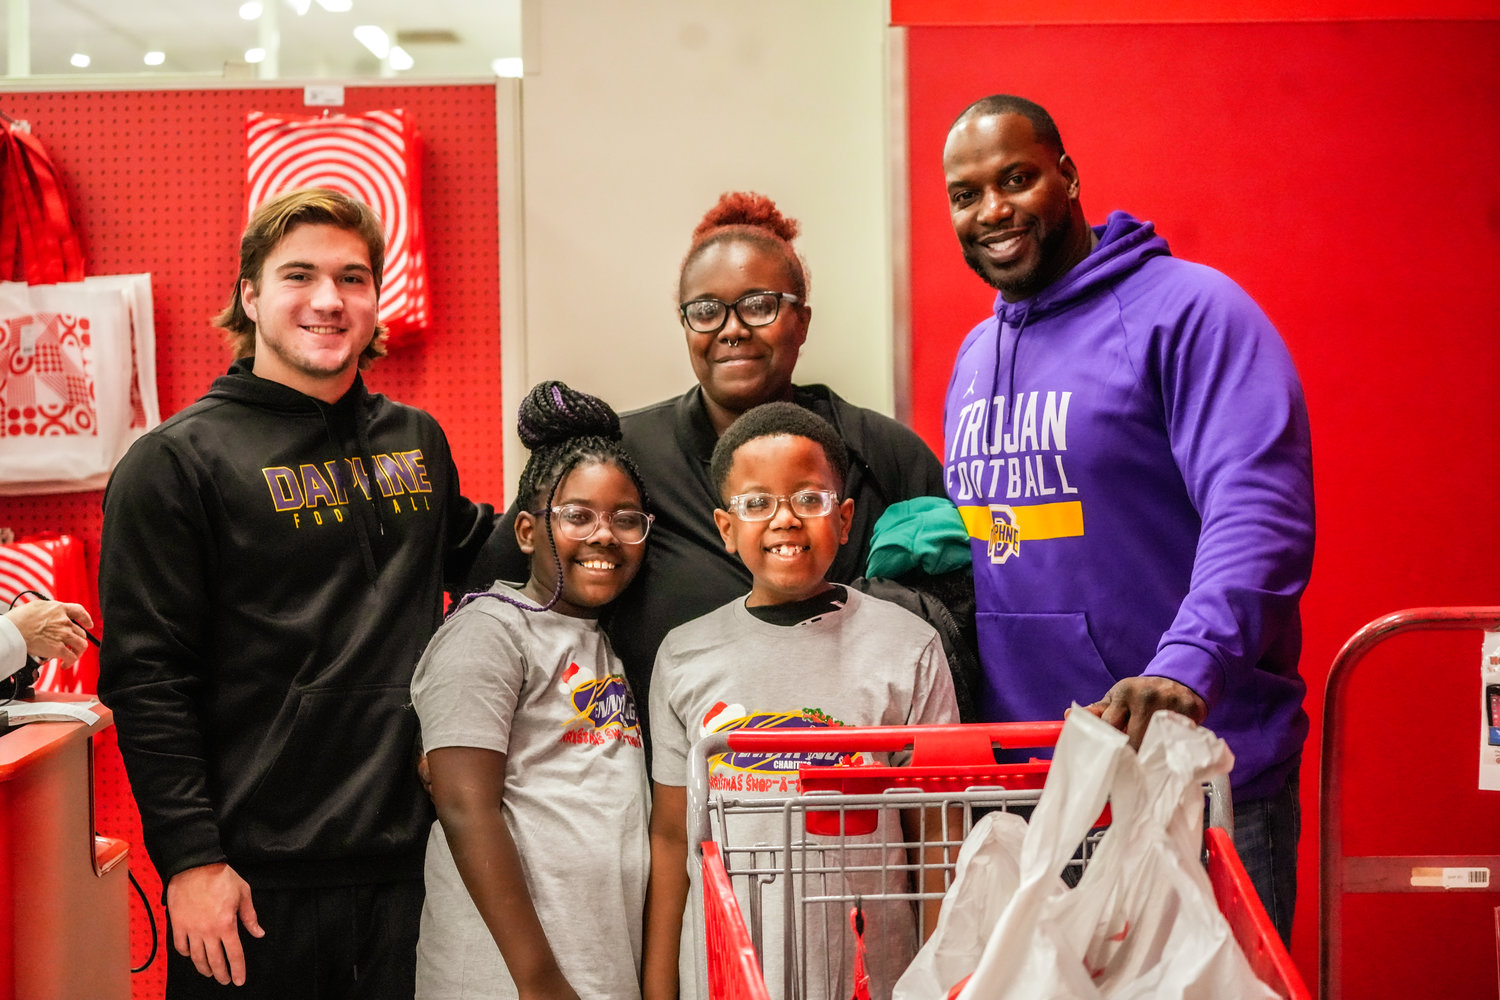 The ninth annual Christmas Shop-A-Thon helped 25 children from Daphne get a free shopping spree at Target Friday, Dec. 23.